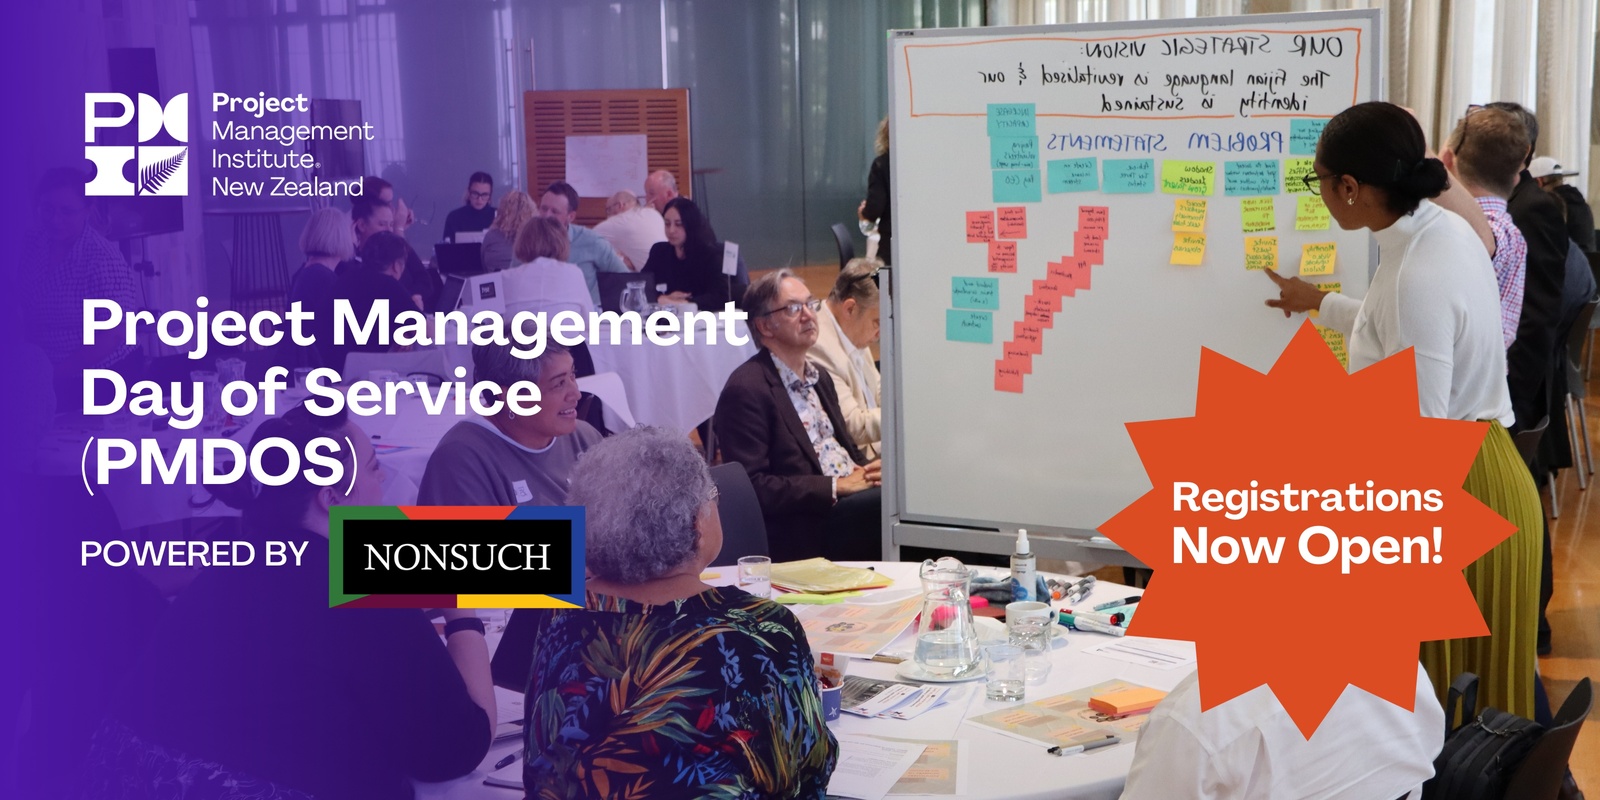 Banner image for Project Management Day of Service, Powered by Nonsuch